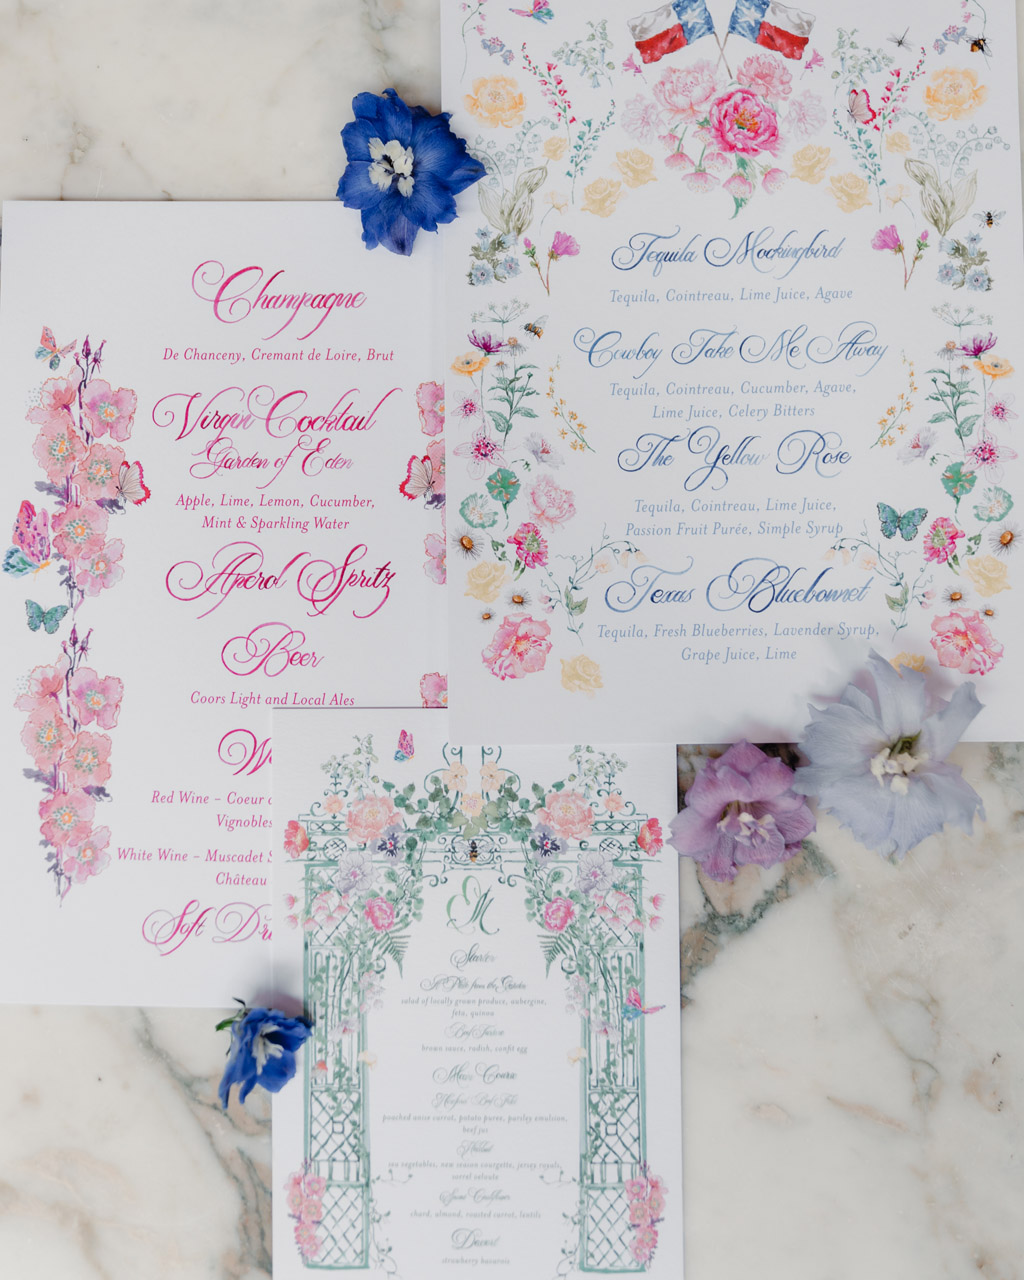 Cotswolds wedding planner tips and menu cards